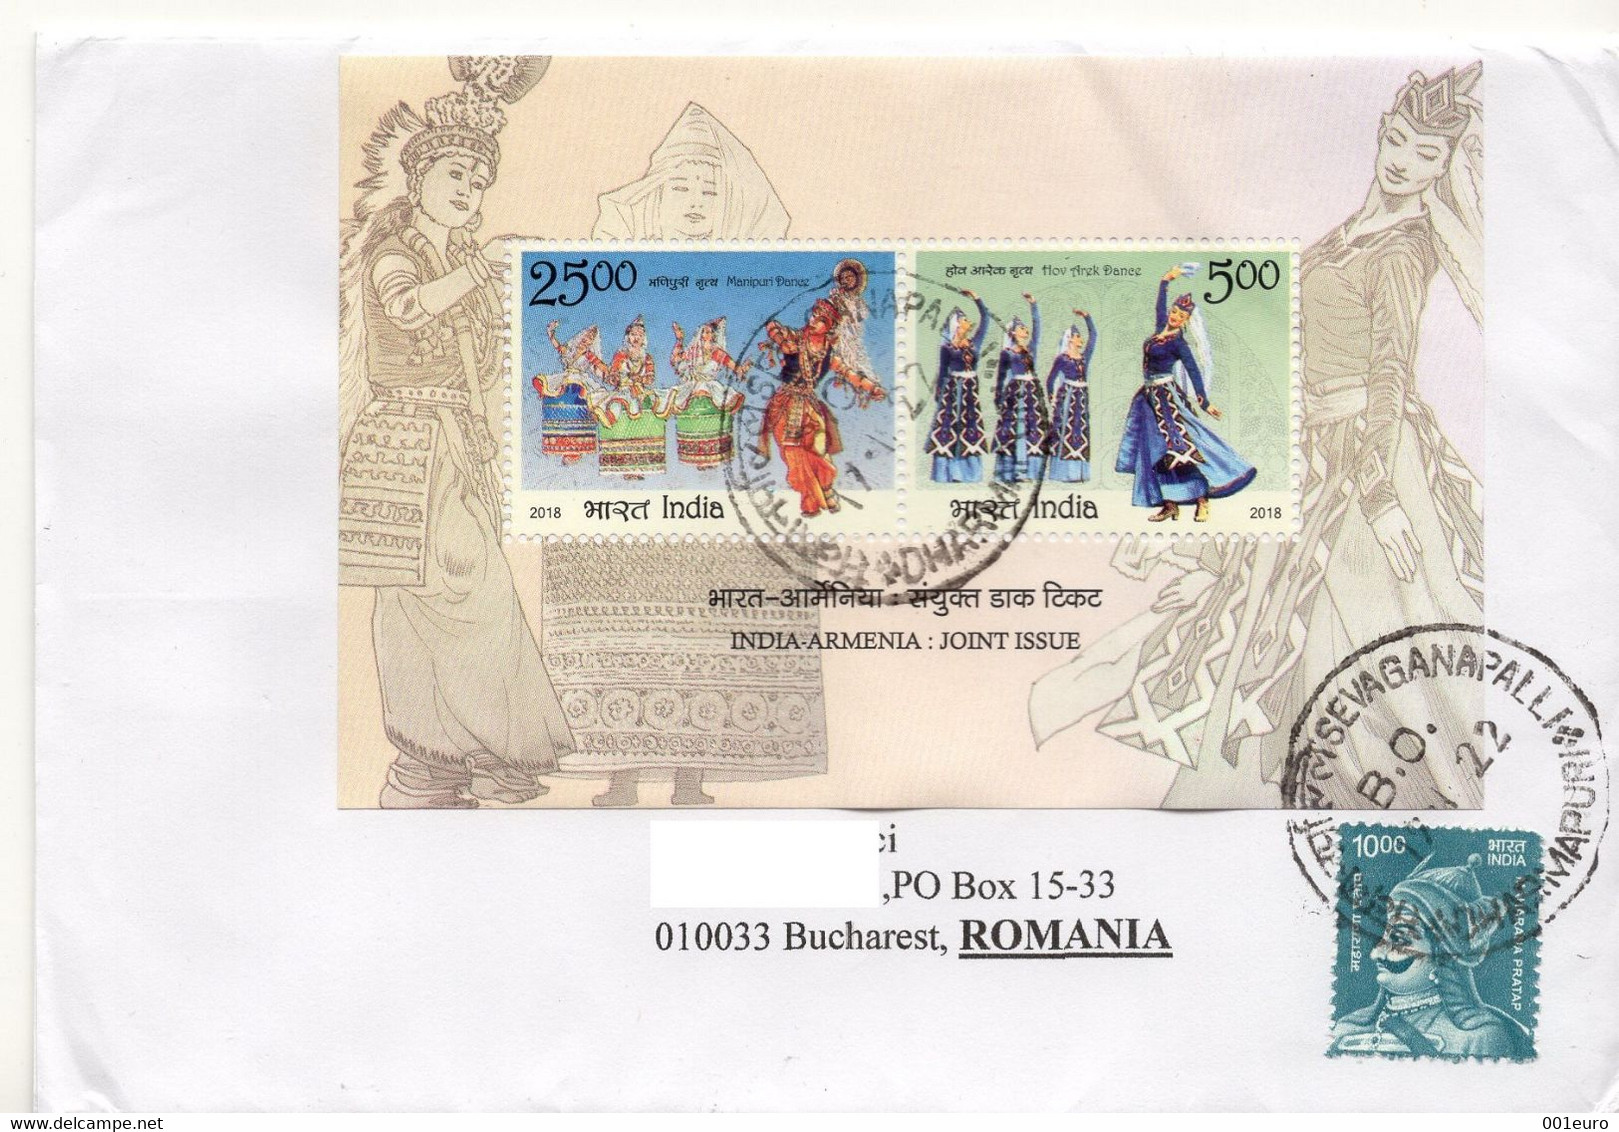 INDIA 2018: JOINT ISSUE INDIA - ARMENIA, DANCES Cover Sent To Romania - Registered Shipping! - Oblitérés